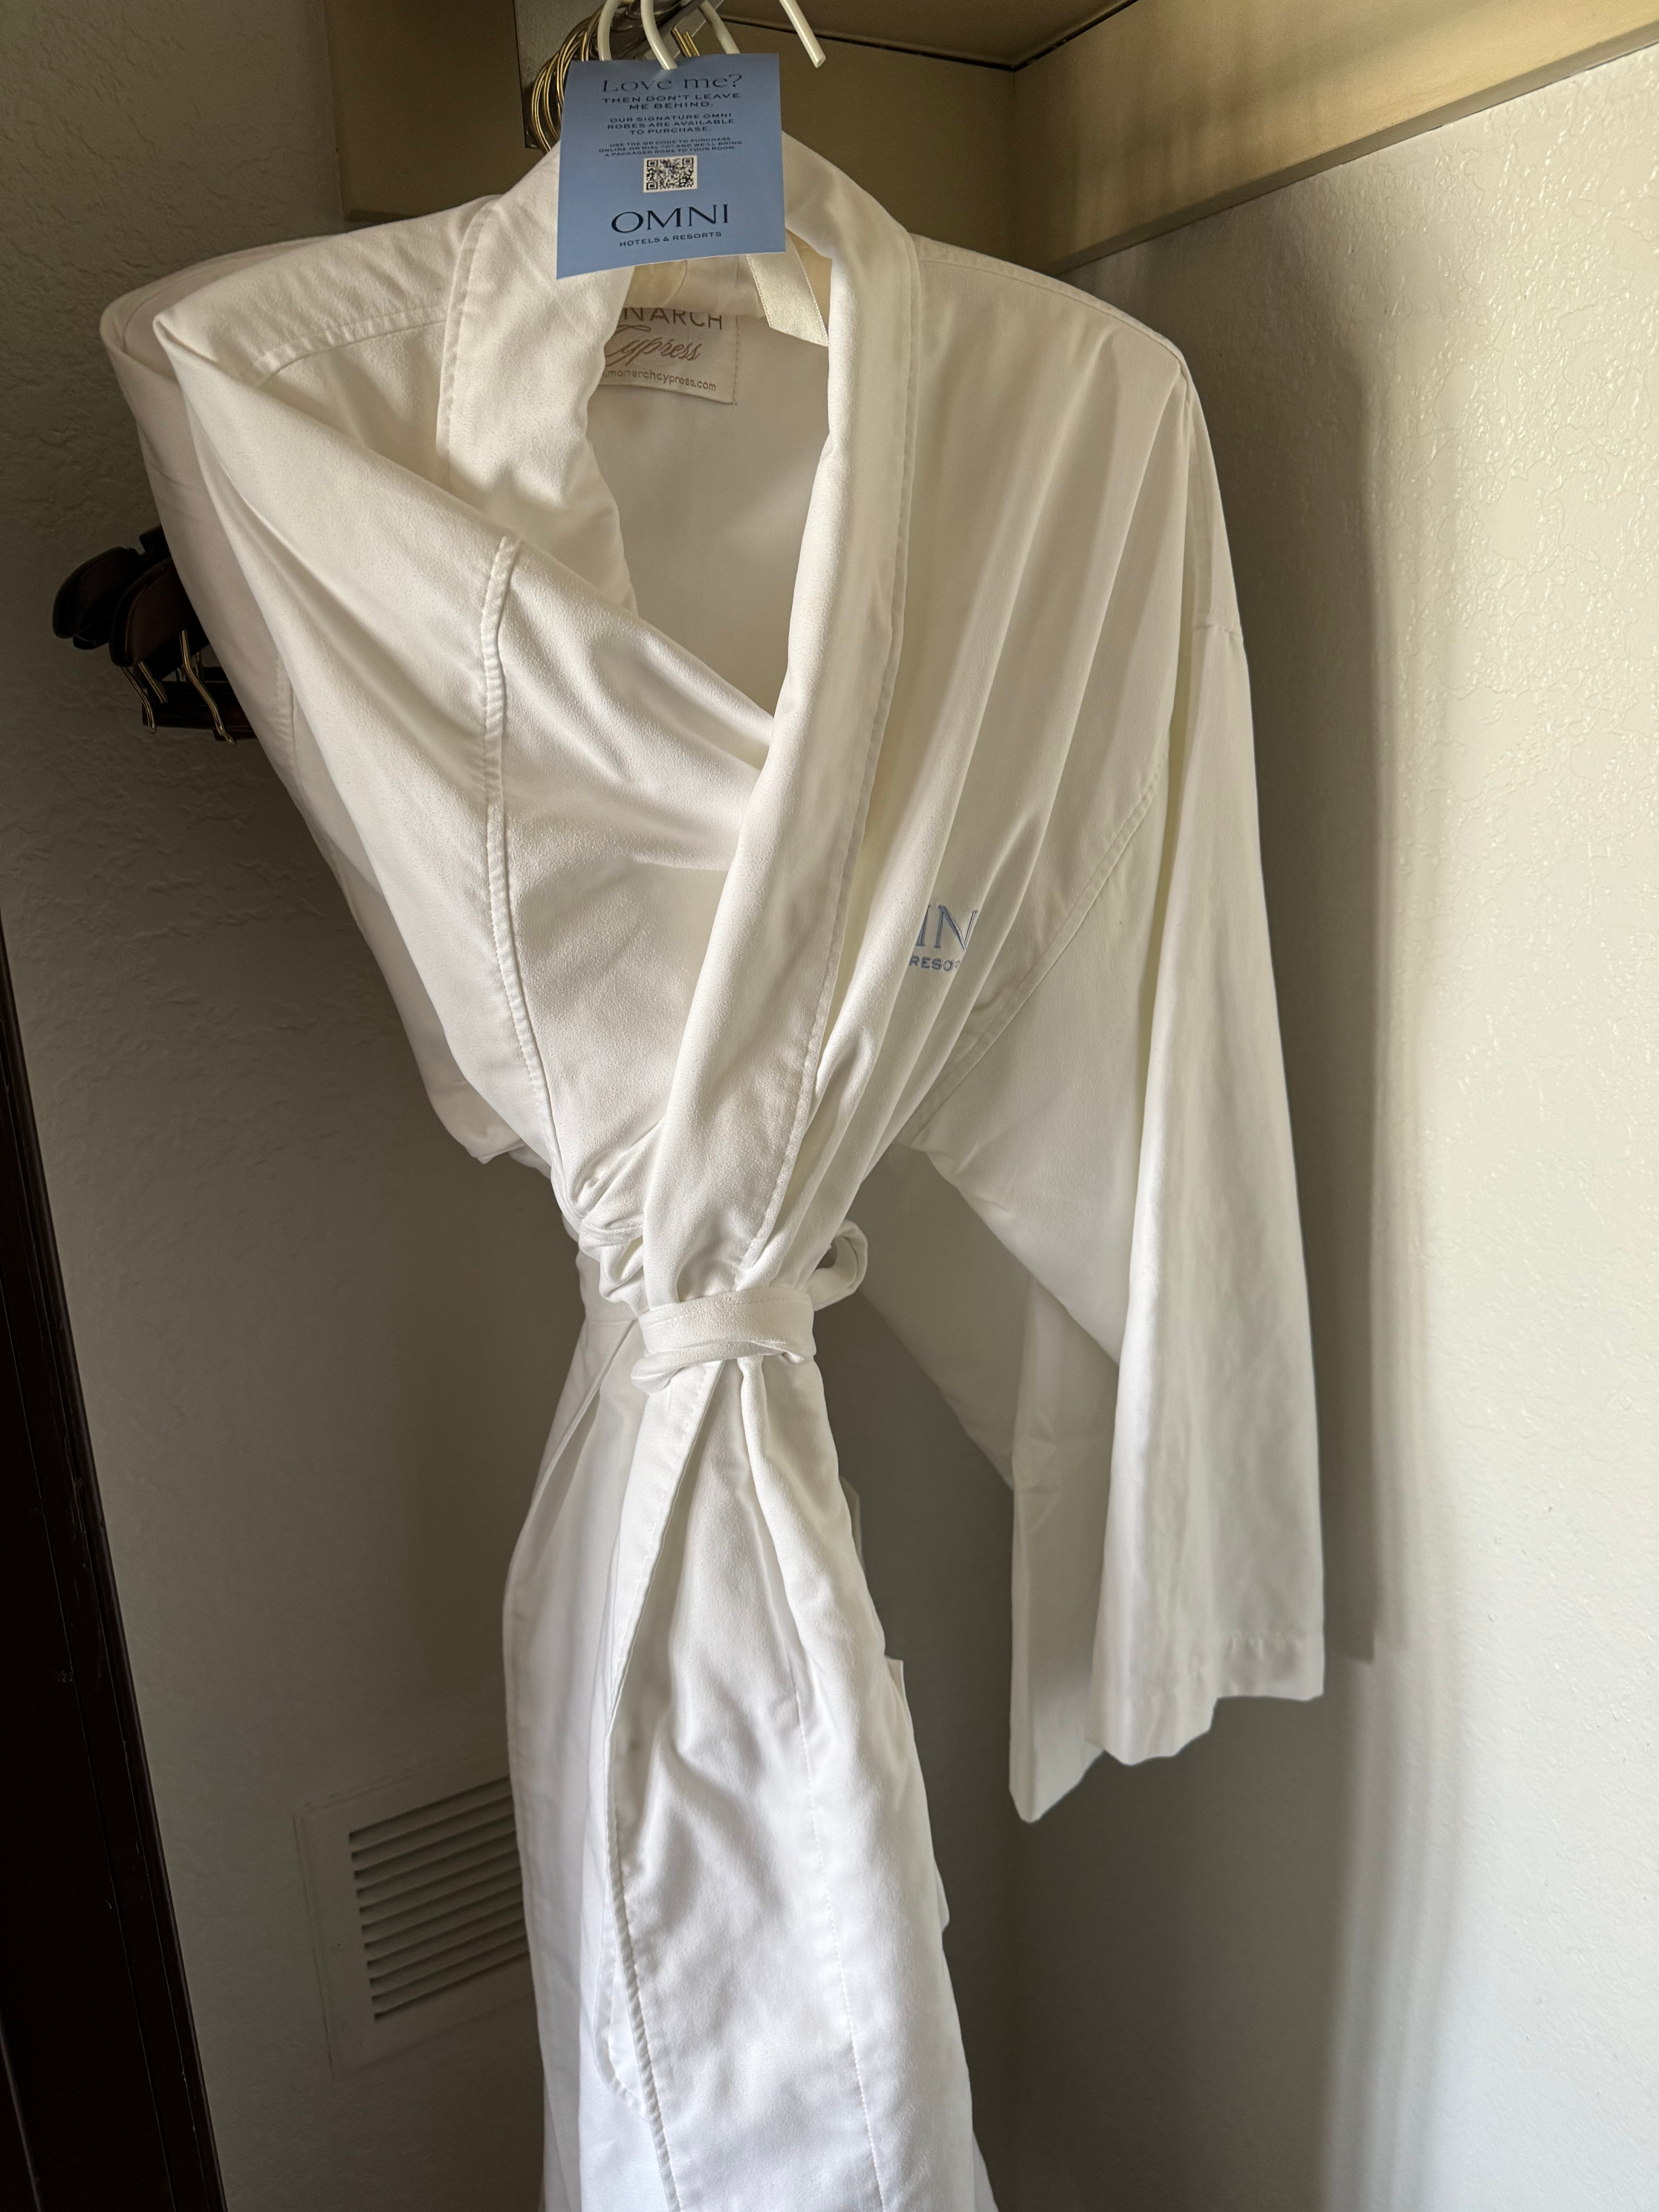 White bathrobe with &quot;Omni&quot; brand logo hanging on a door, possibly from a hotel room